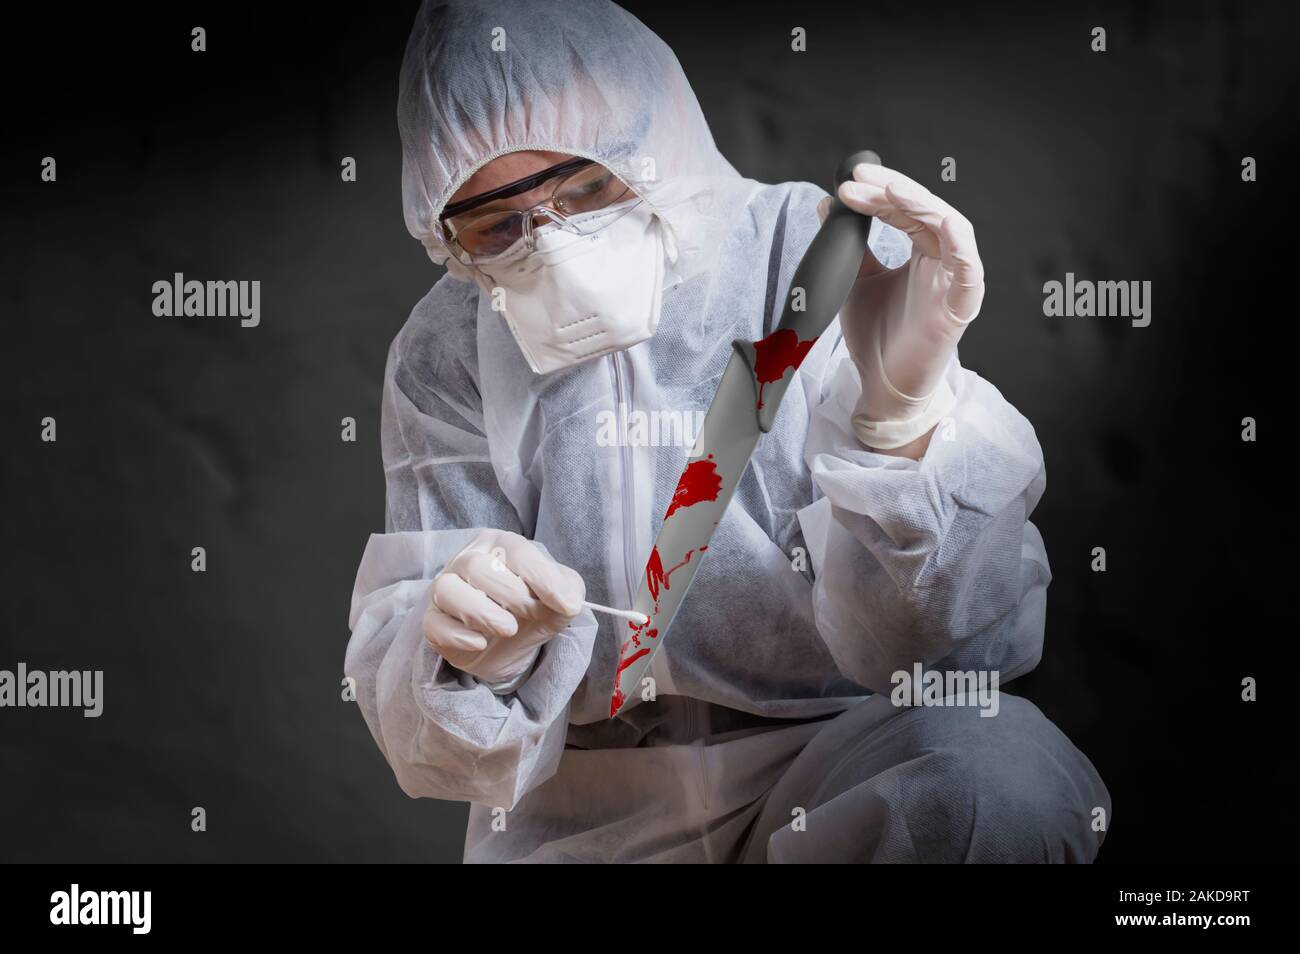 Crime scene investigation, taking DNA sample from blood stain with cotton swab on murder crime scene. Stock Photo